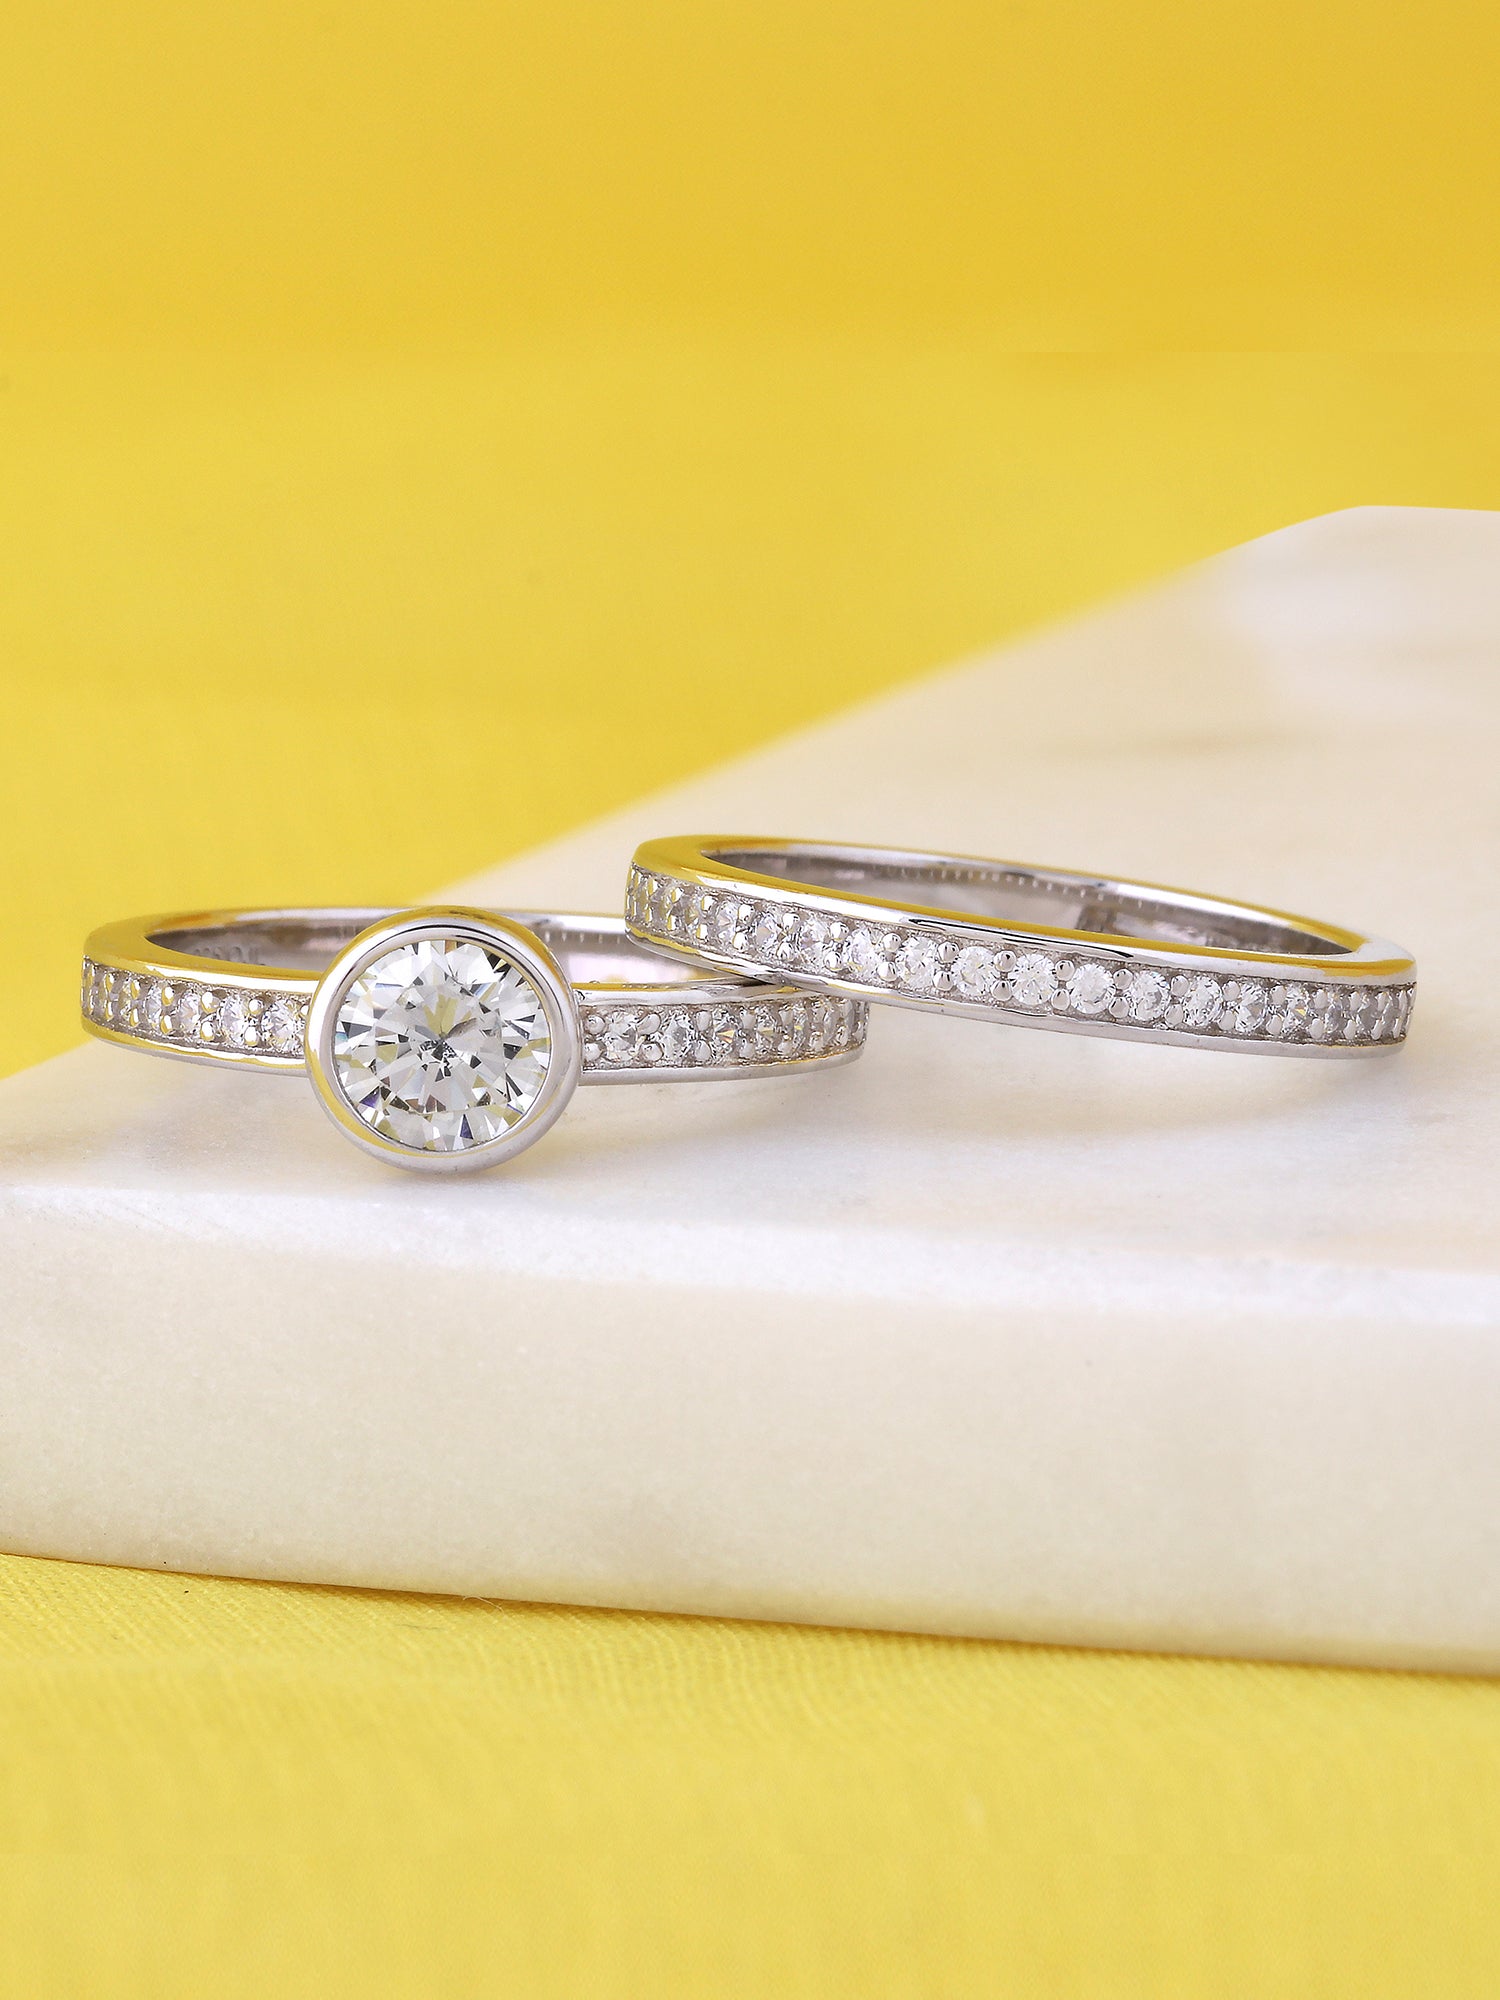 1 CARAT AMERICAN DIAMOND SOLITAIRE RING WITH A BAND-8